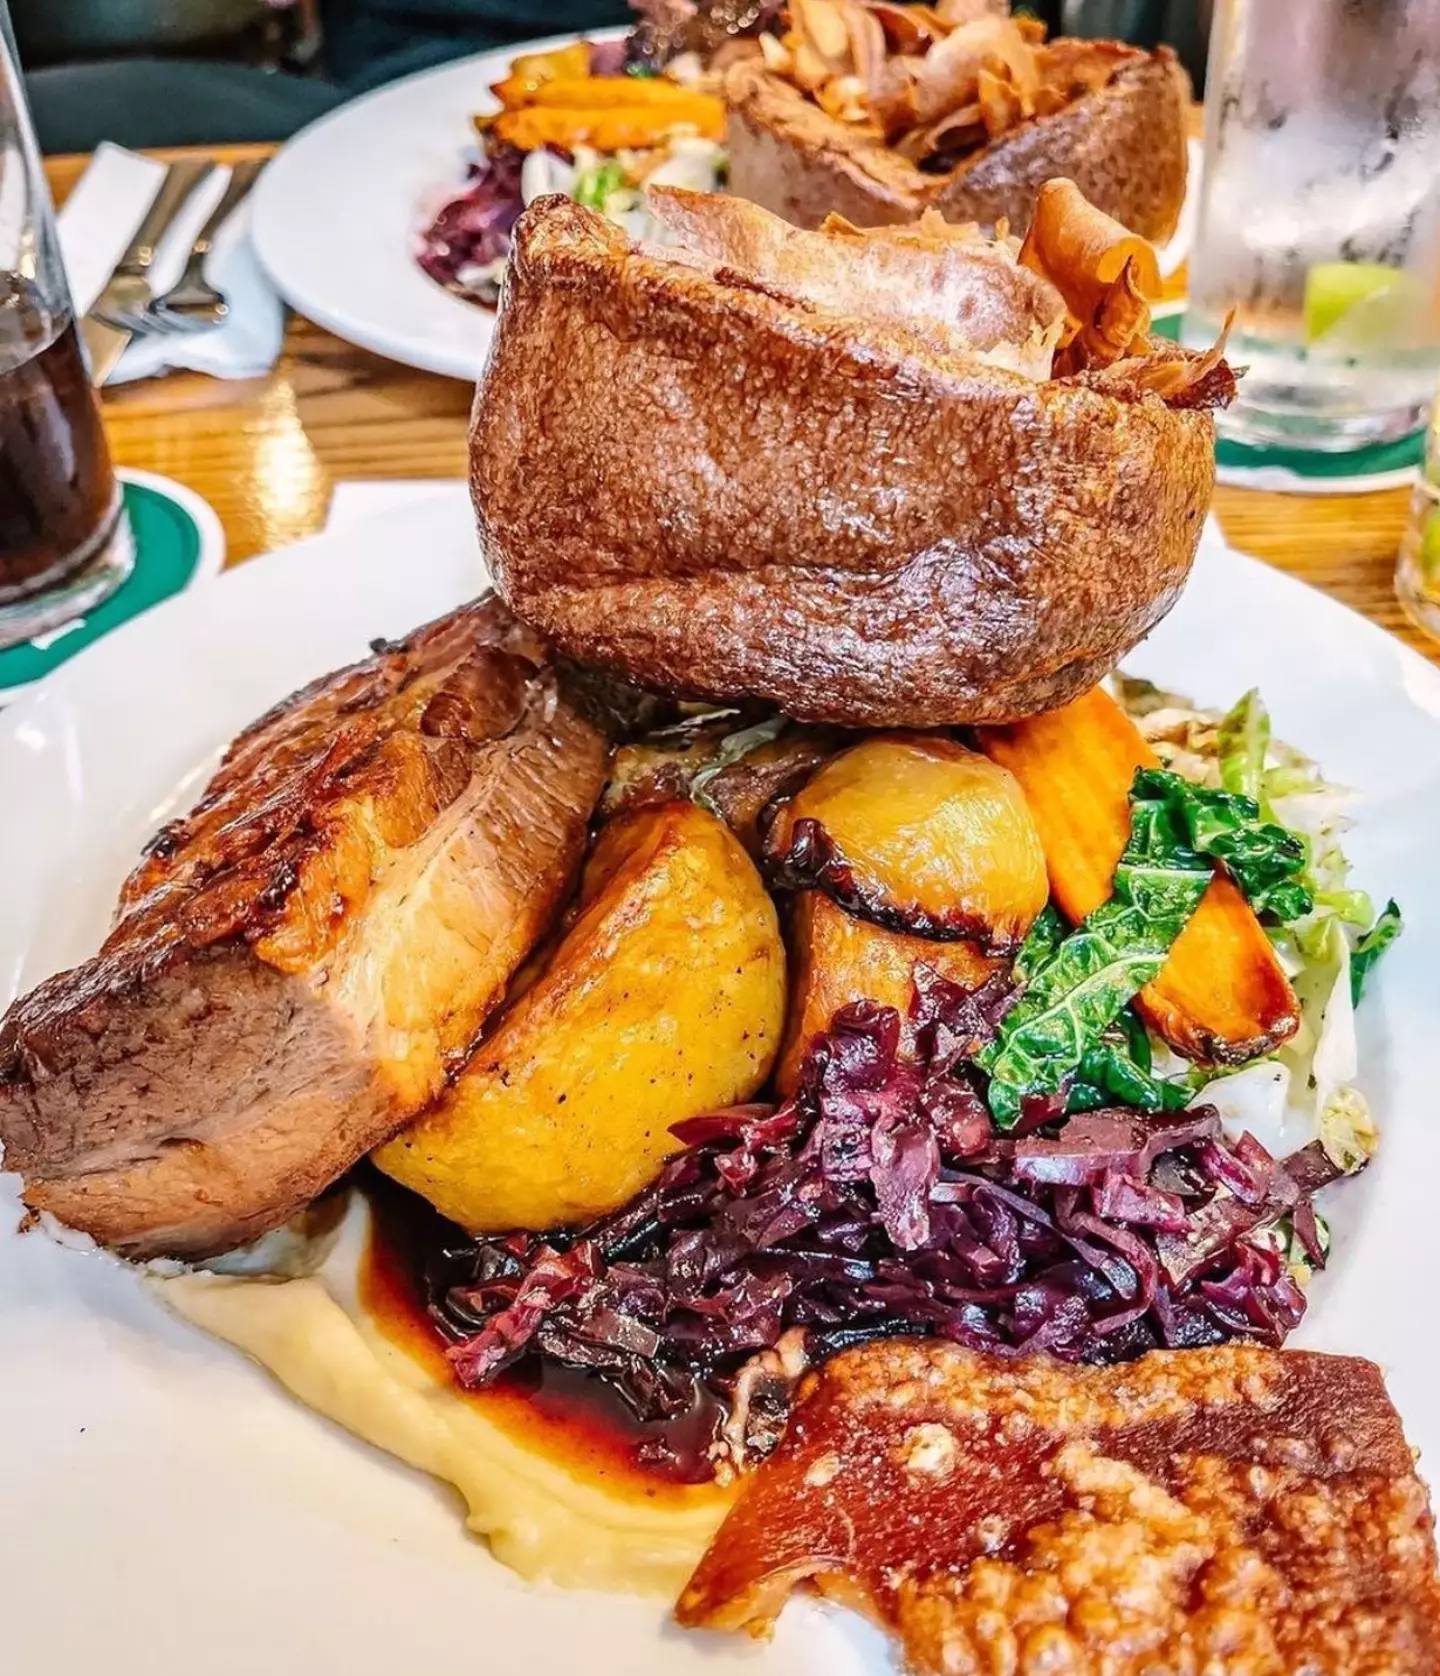 The roasts on offer at The Bank Tavern has won awards.